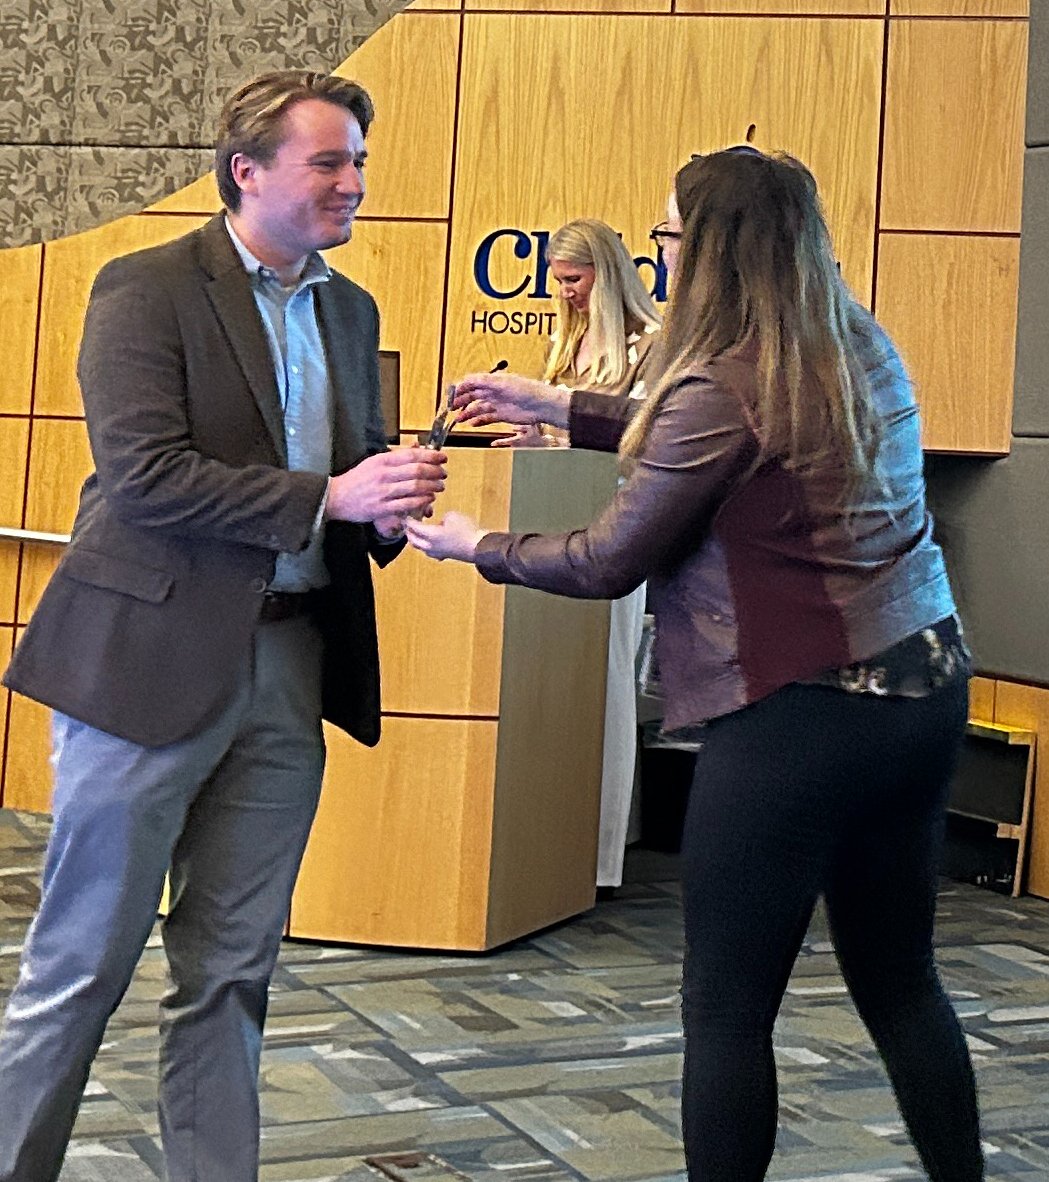 Congratulations to David Doss, MD, PhD student from Mahapatra’s Lab @sid_mahapatra on the 3rd place in the Graduate Student Category at 22nd Annual Child Health Research Forum